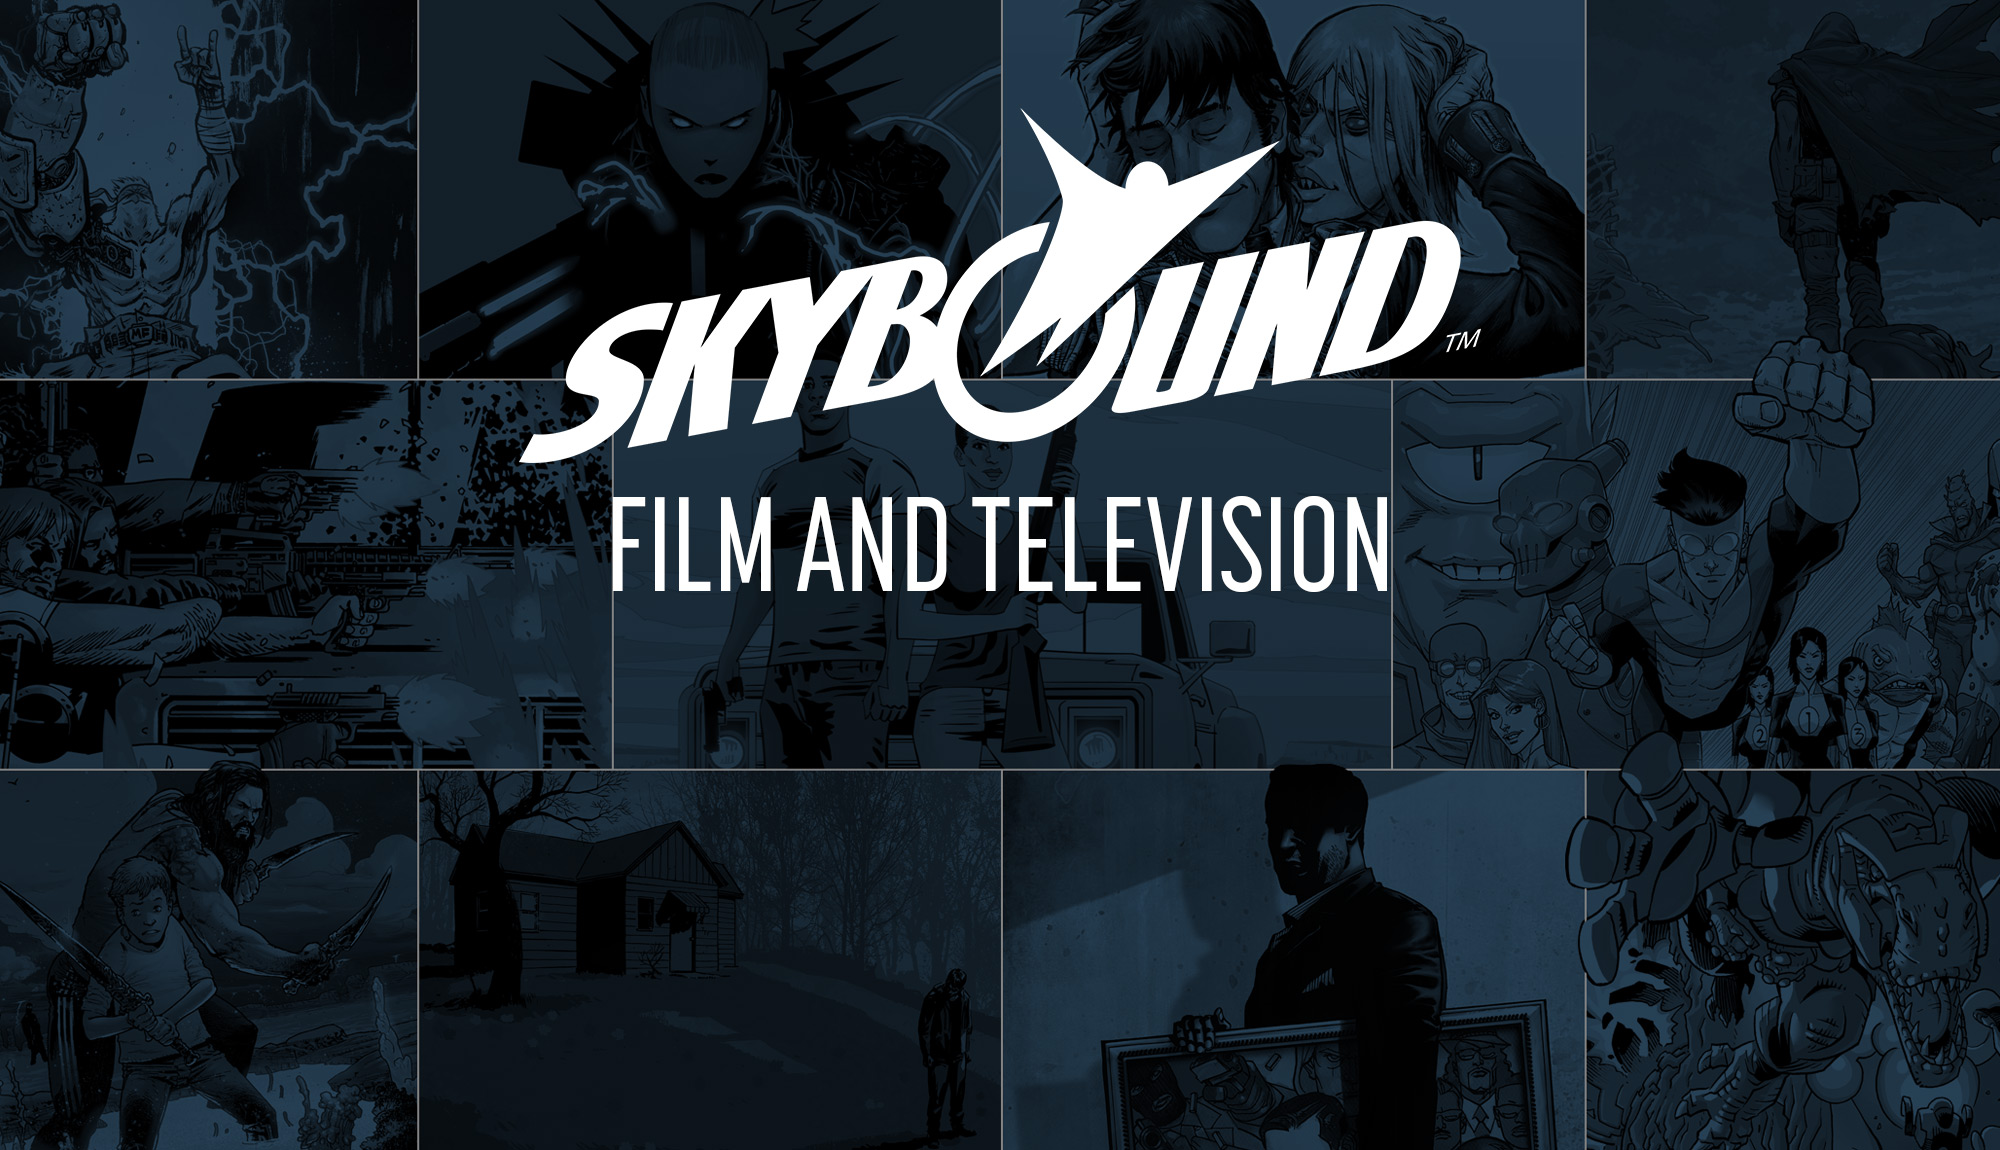 Skybound Partners with Entertainment One for New Apocalyptic TV Series “5 Year”